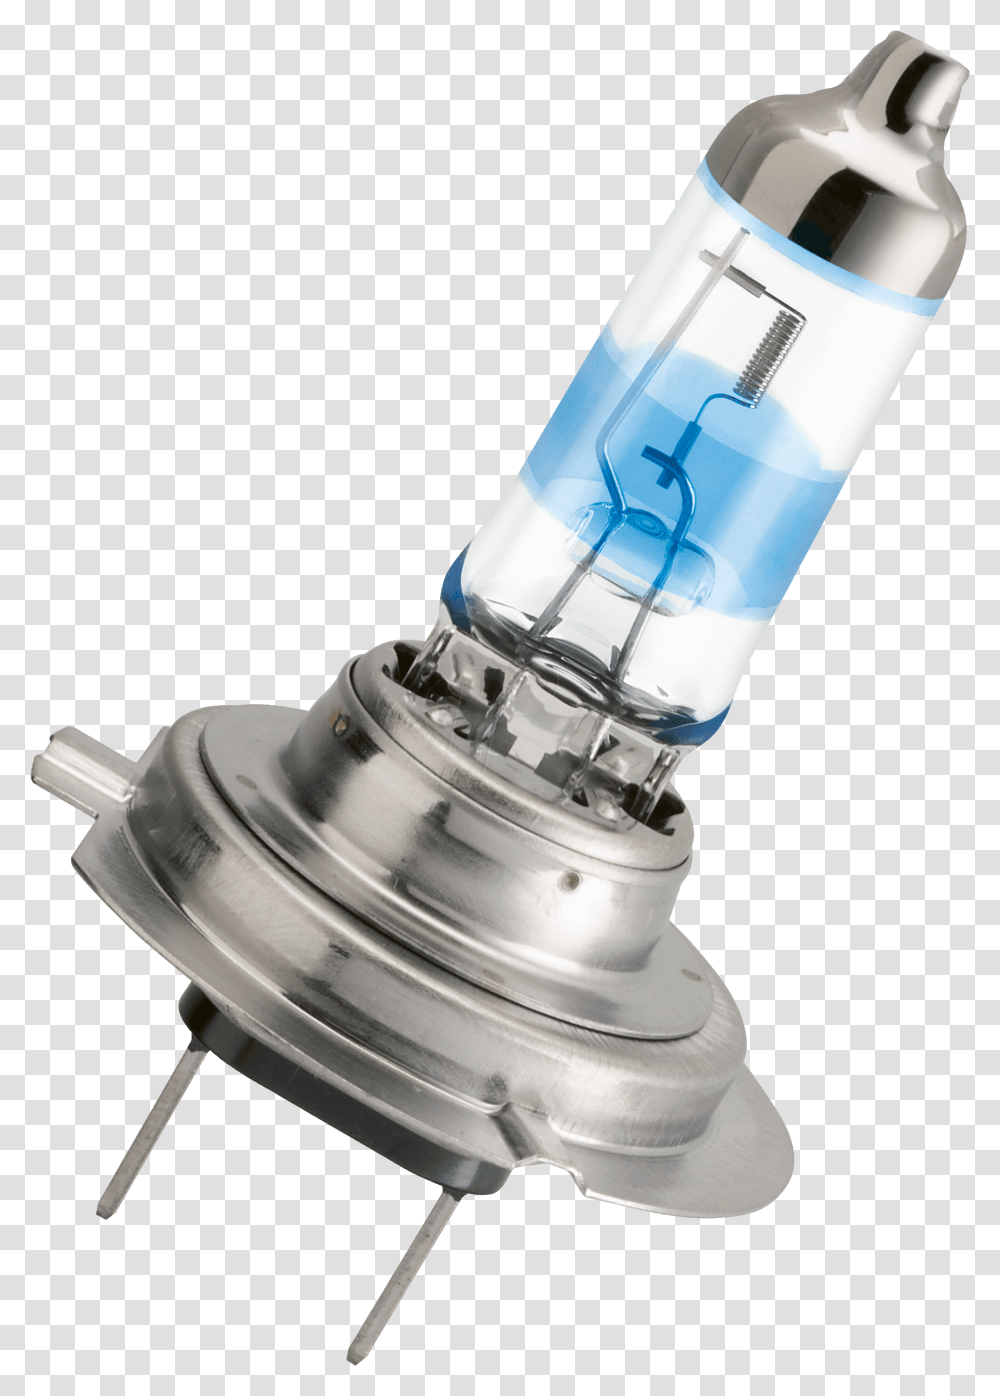 Headlight Bulb Philips Racing Vision Twin Pack Philips Racing Vision 12v, Mixer, Appliance, Bottle, Blender Transparent Png